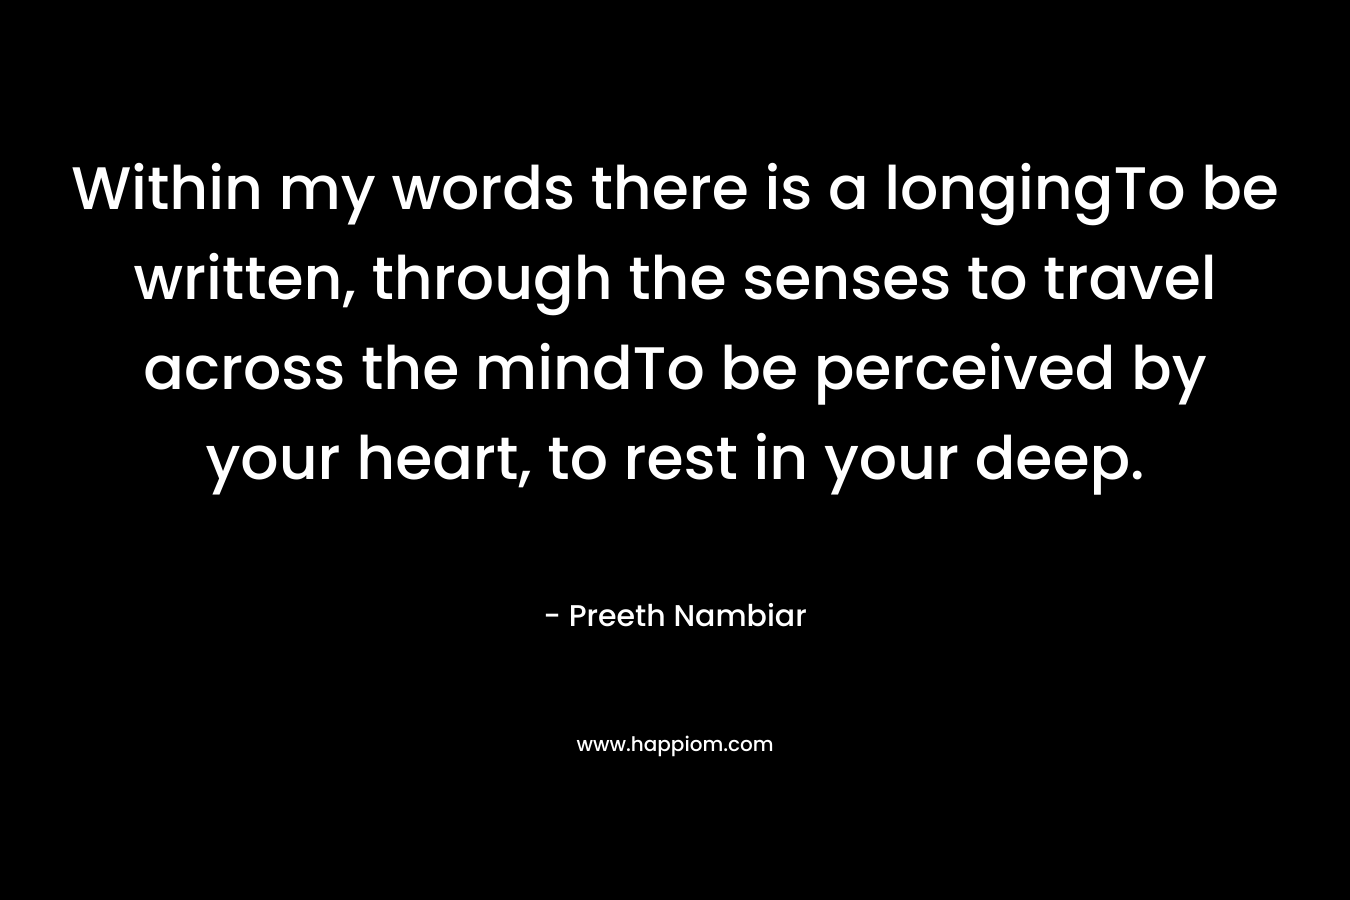 Within my words there is a longingTo be written, through the senses to travel across the mindTo be perceived by your heart, to rest in your deep. – Preeth Nambiar